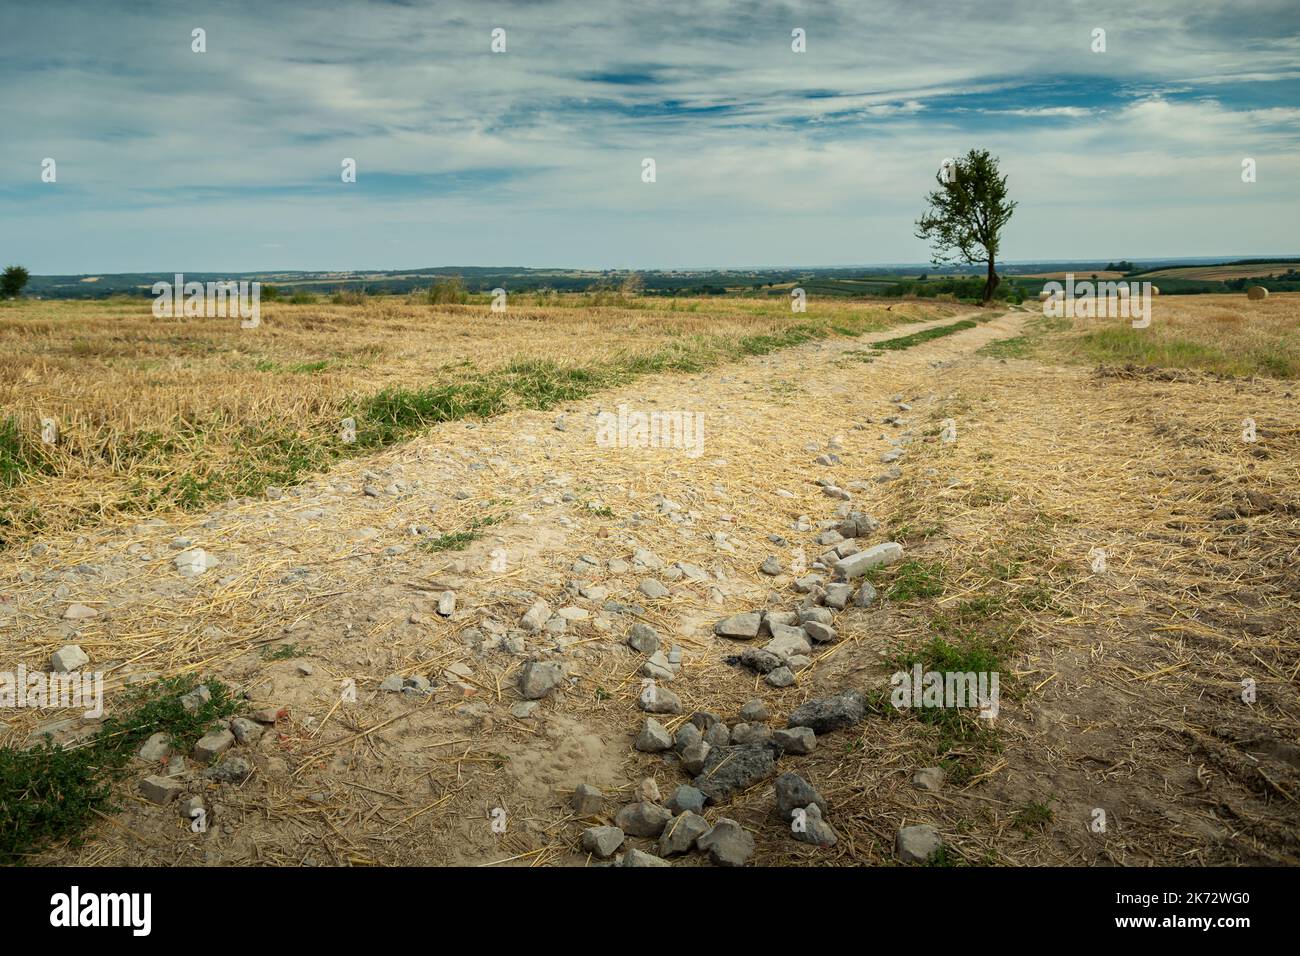 Stones on a dirt road through the fields Stock Photo